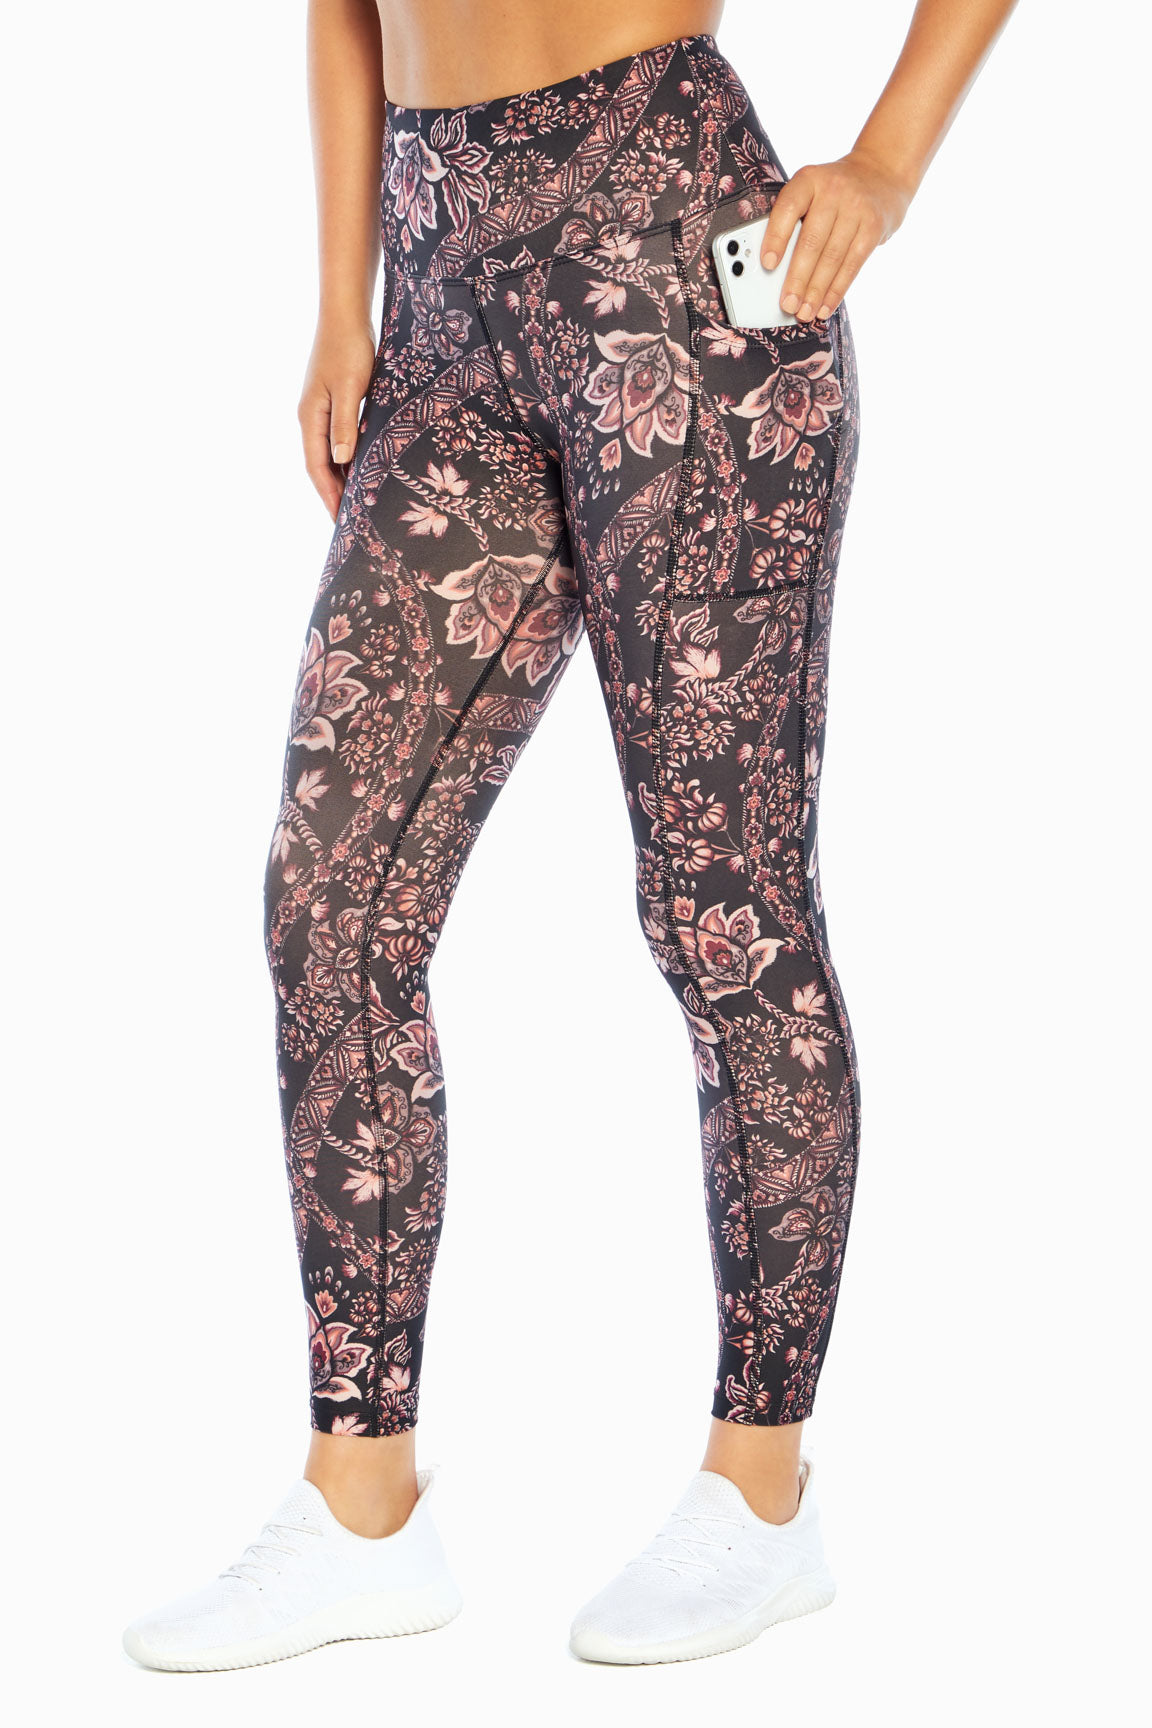  Marika High Rise Mid-Calf Pocket Legging, Crepe Flowers, Small  : Clothing, Shoes & Jewelry